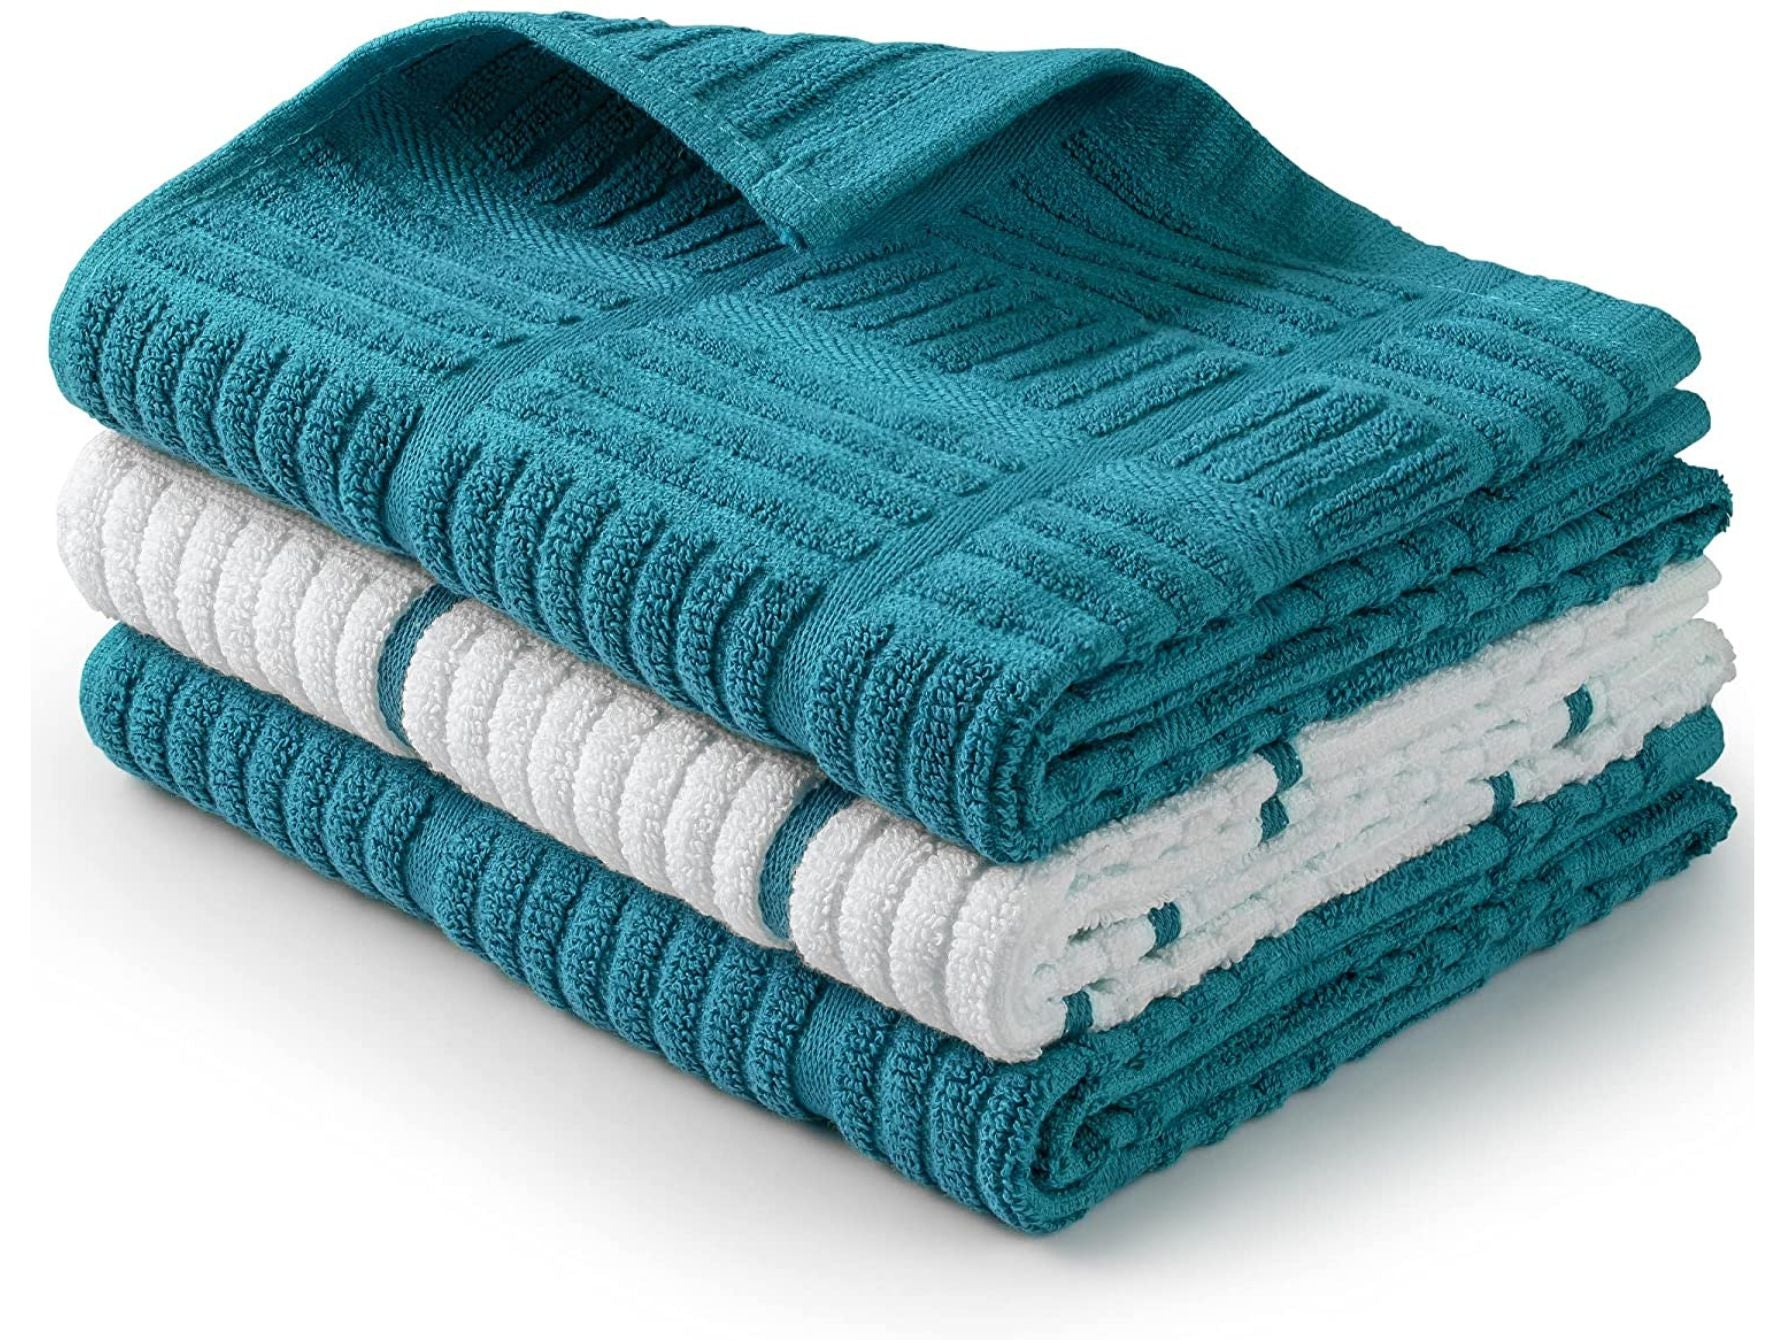 Zulay Kitchen Waffle Weave Kitchen Towels - 6 Pack 12 x 12 inch - (Teal), 6  - Harris Teeter